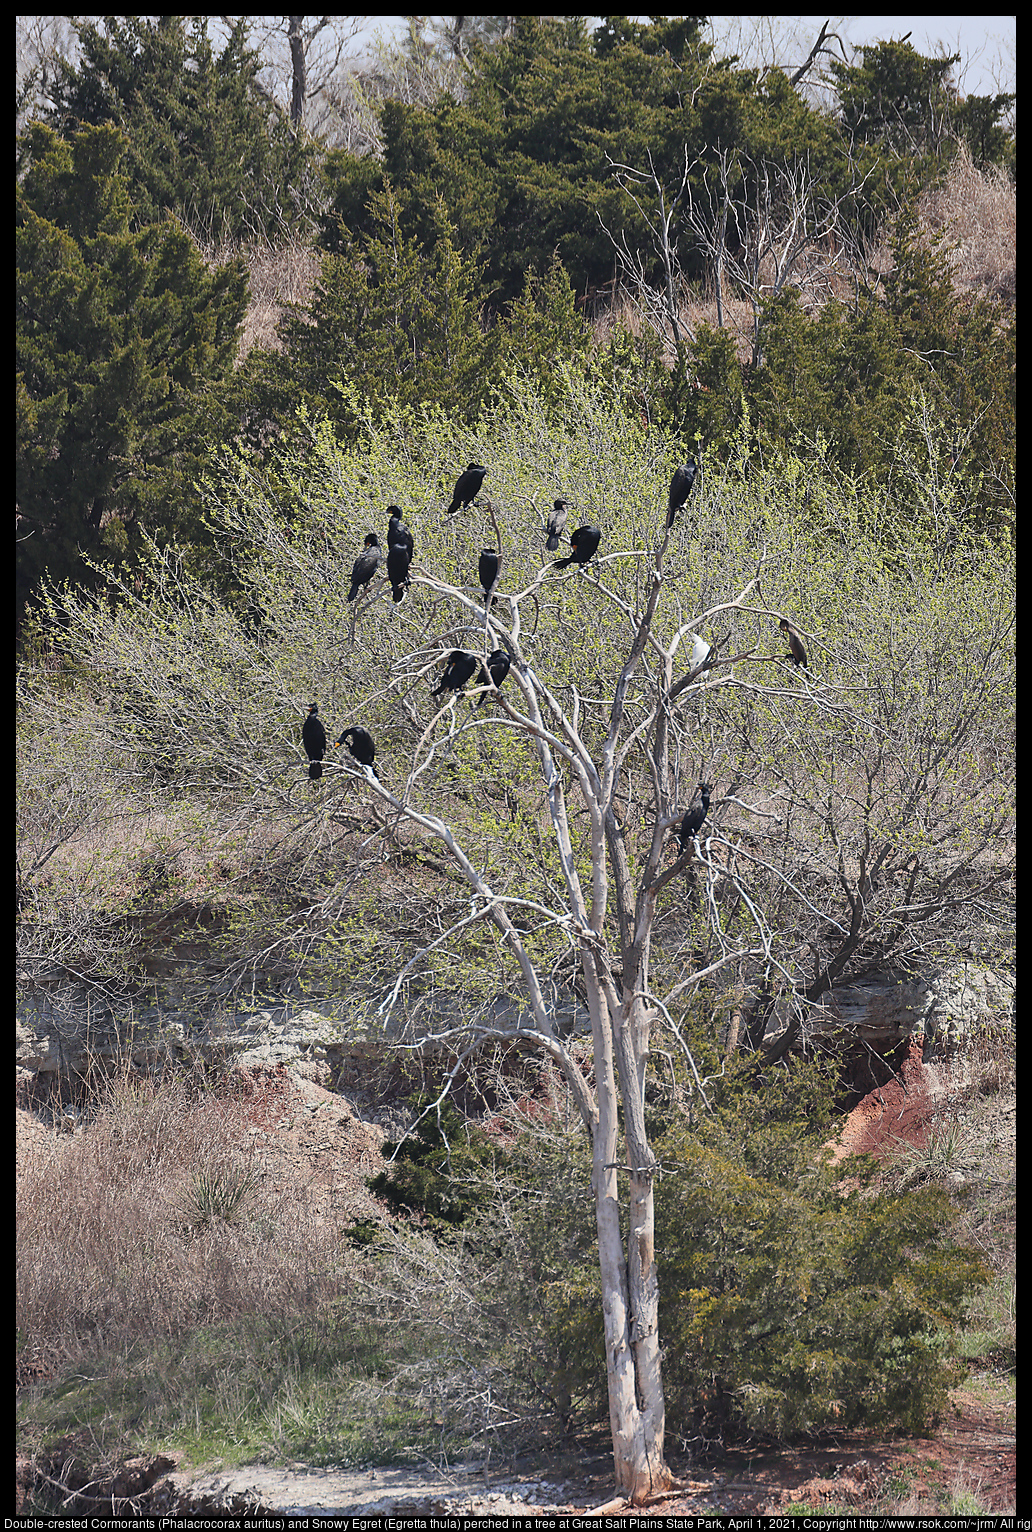 Double-crested Cormorants (Phalacrocorax auritus) and Snowy Egret (Egretta thula) perched in a tree at Great Salt Plains State Park, April 1, 2021